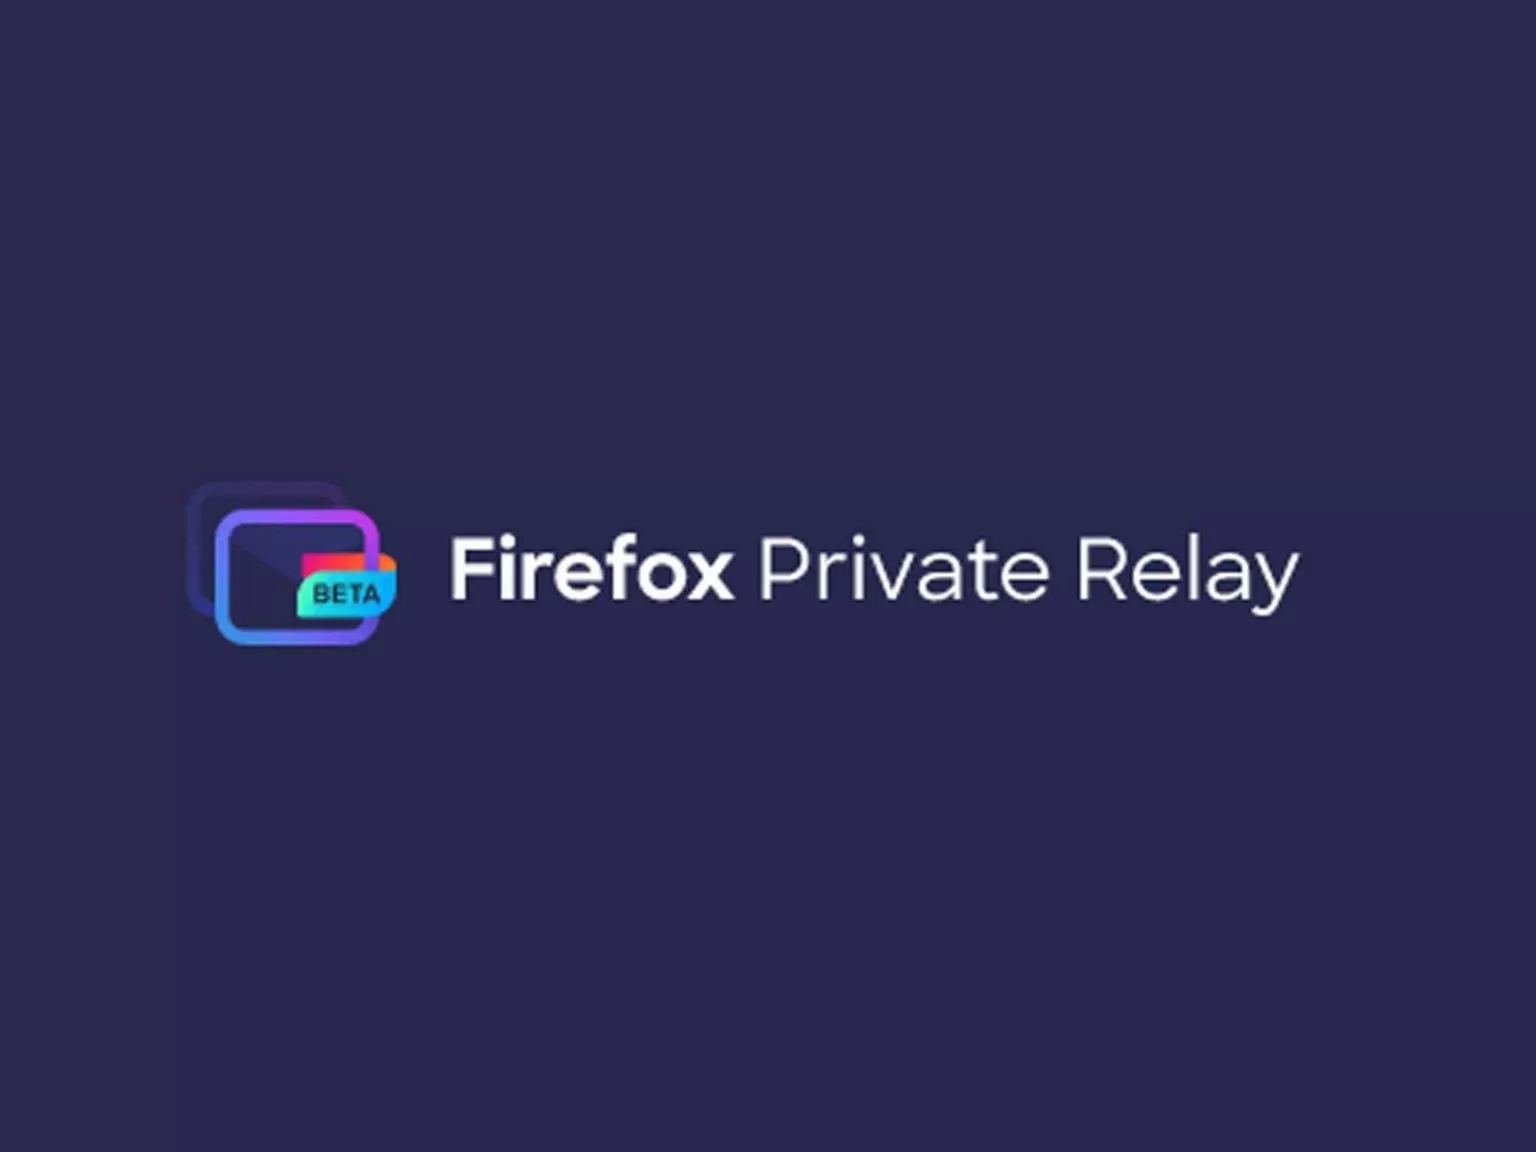 Firefox Private Relay